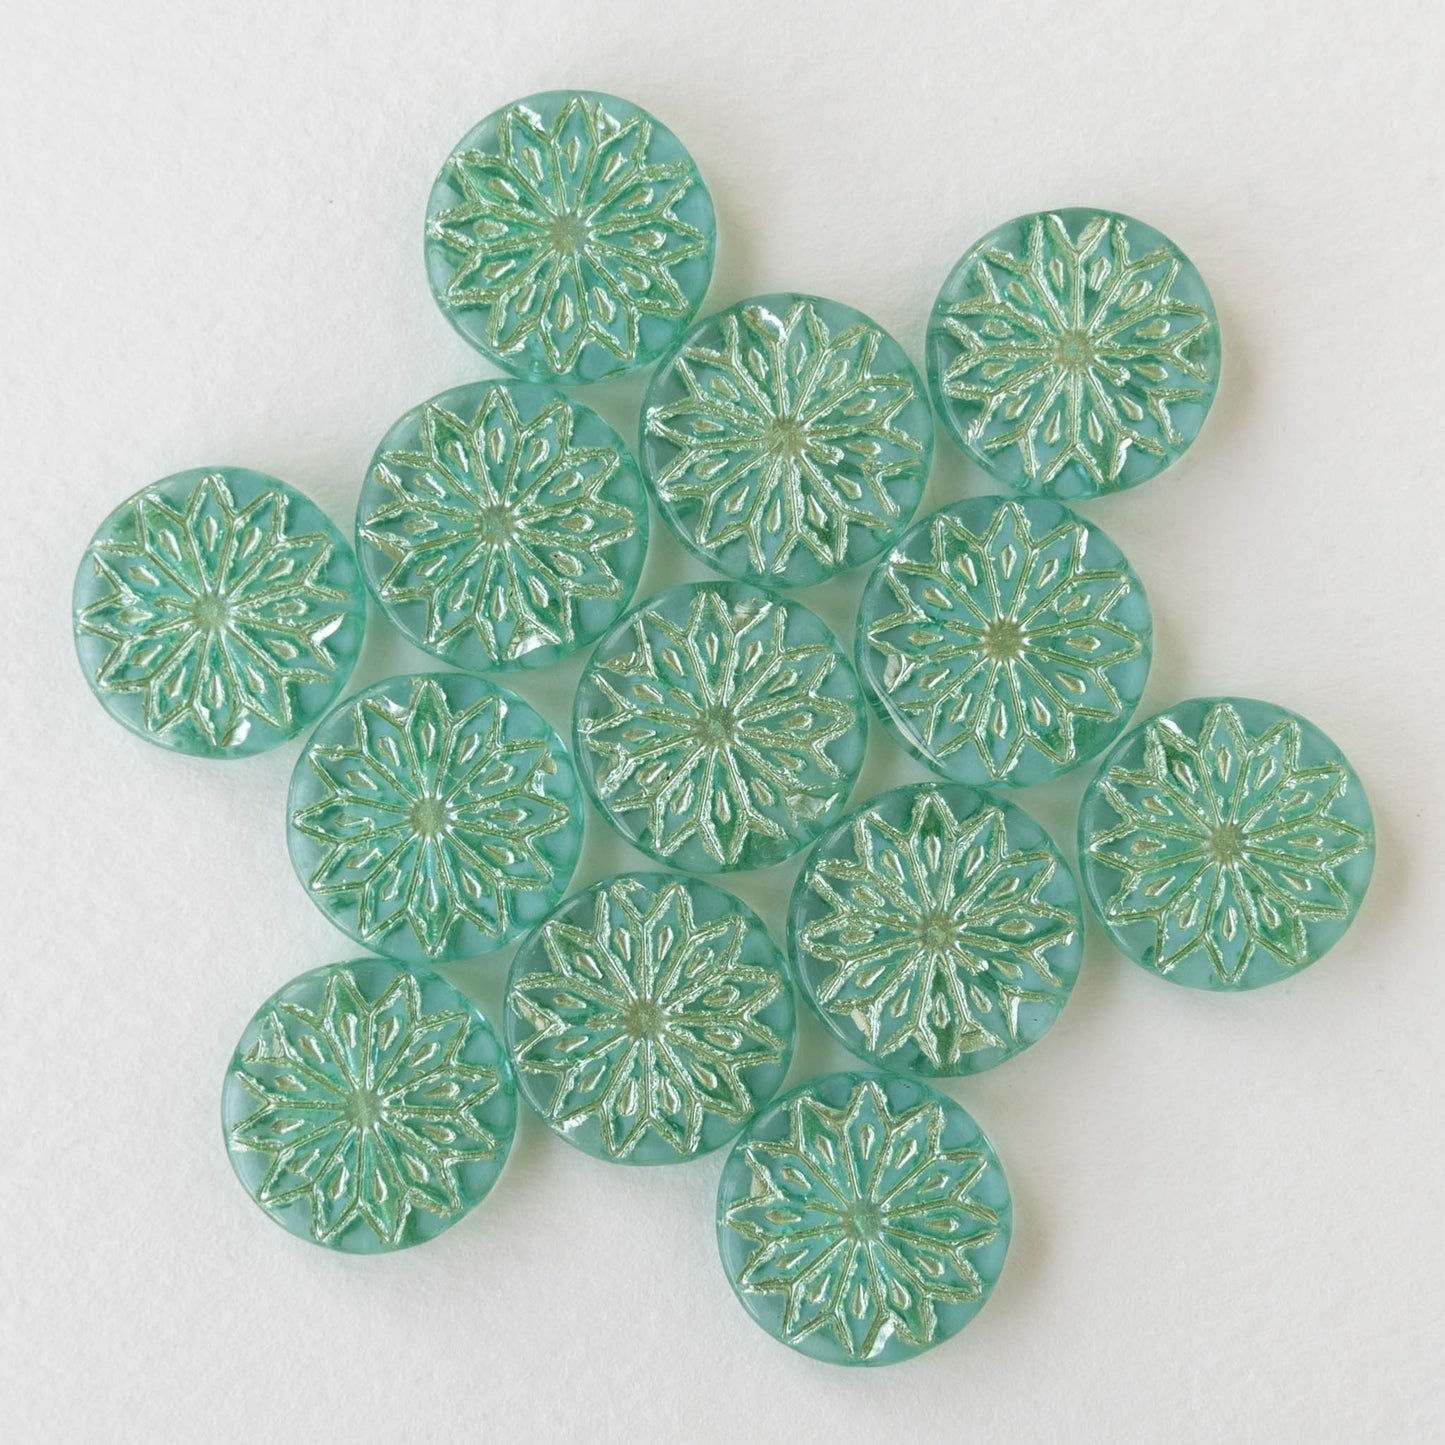 18mm Coin Flower Beads - Light Green with Silver Wash - 6 beads